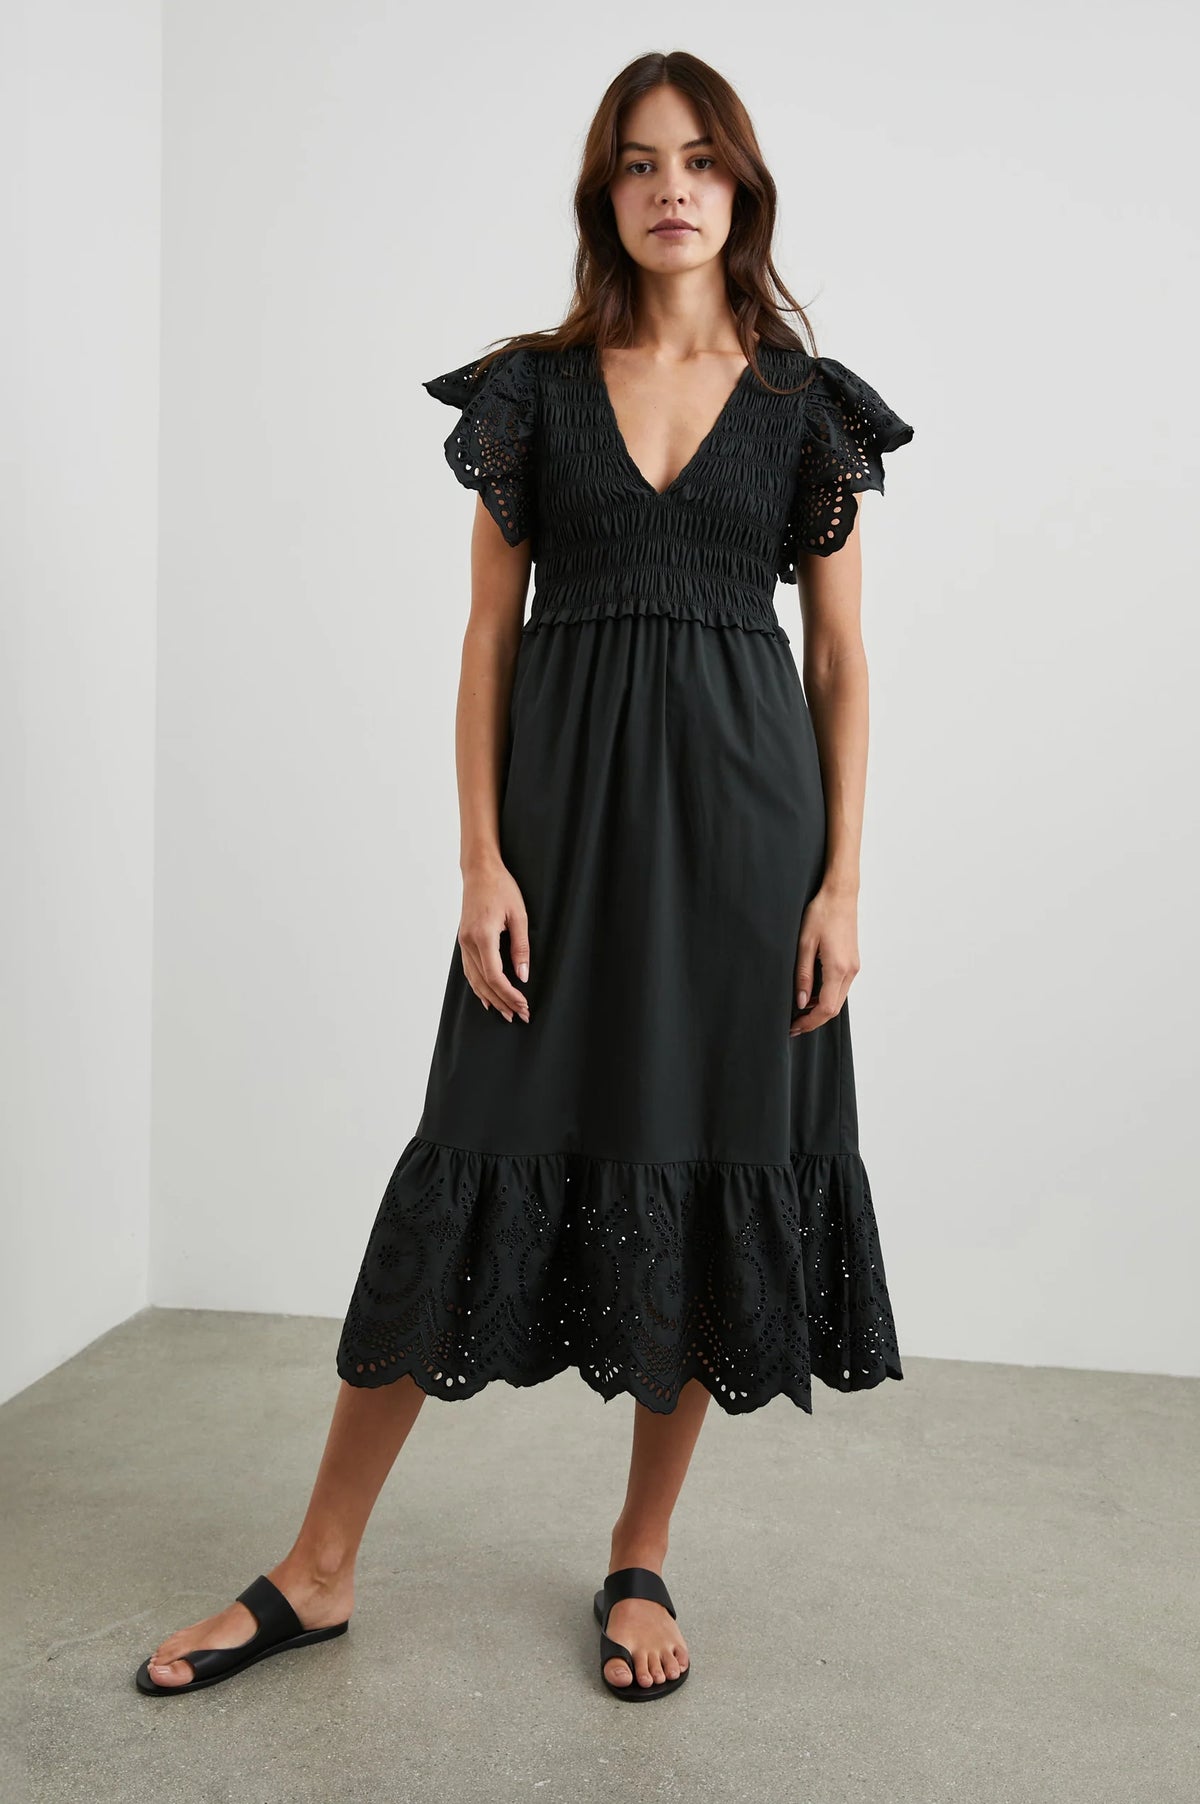 Black midi dress with eyelet features and ruched V neck bodice